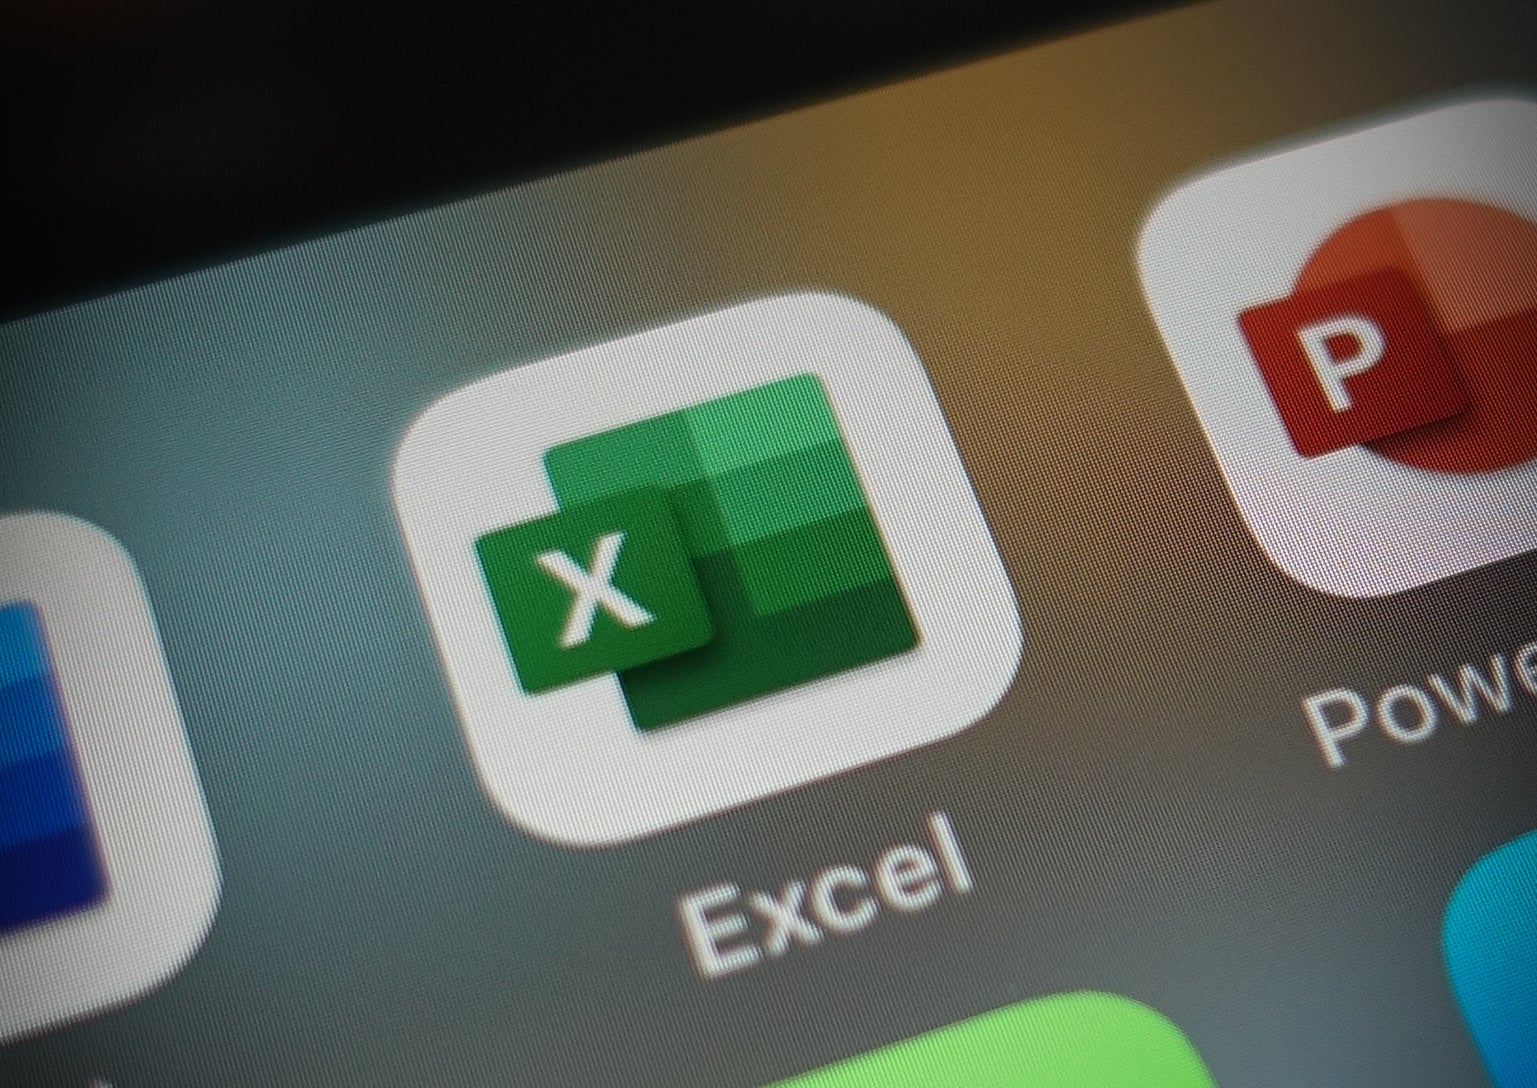 the excel app